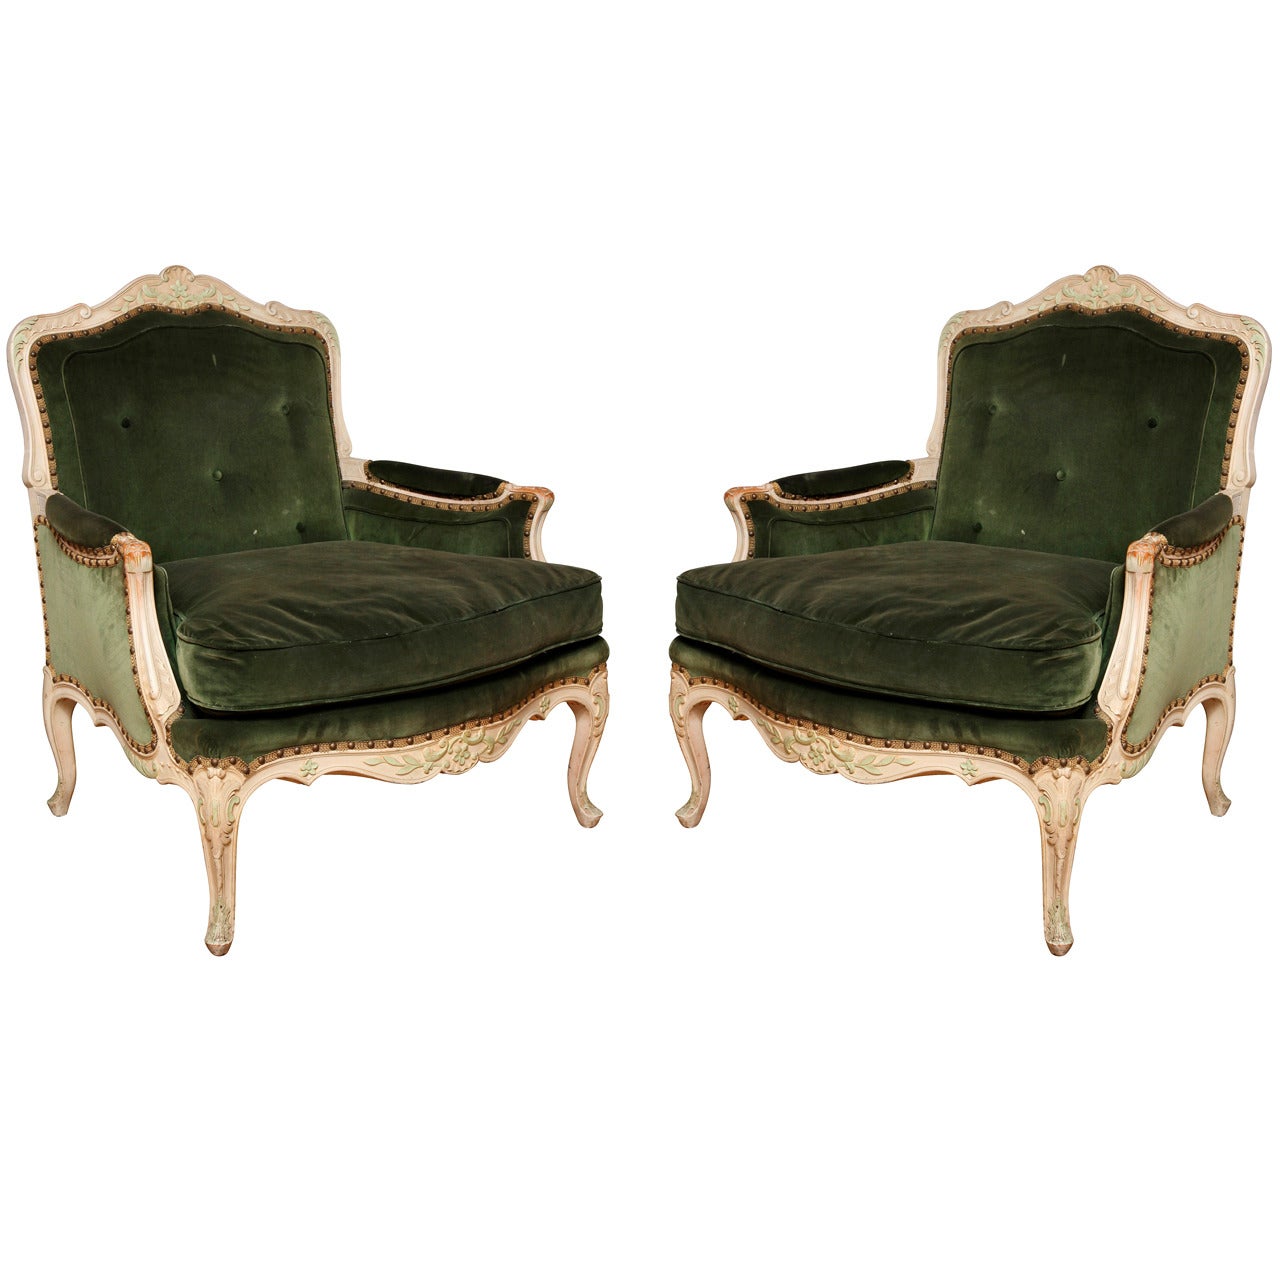 A Pair of French Louis XV Style Bergeres